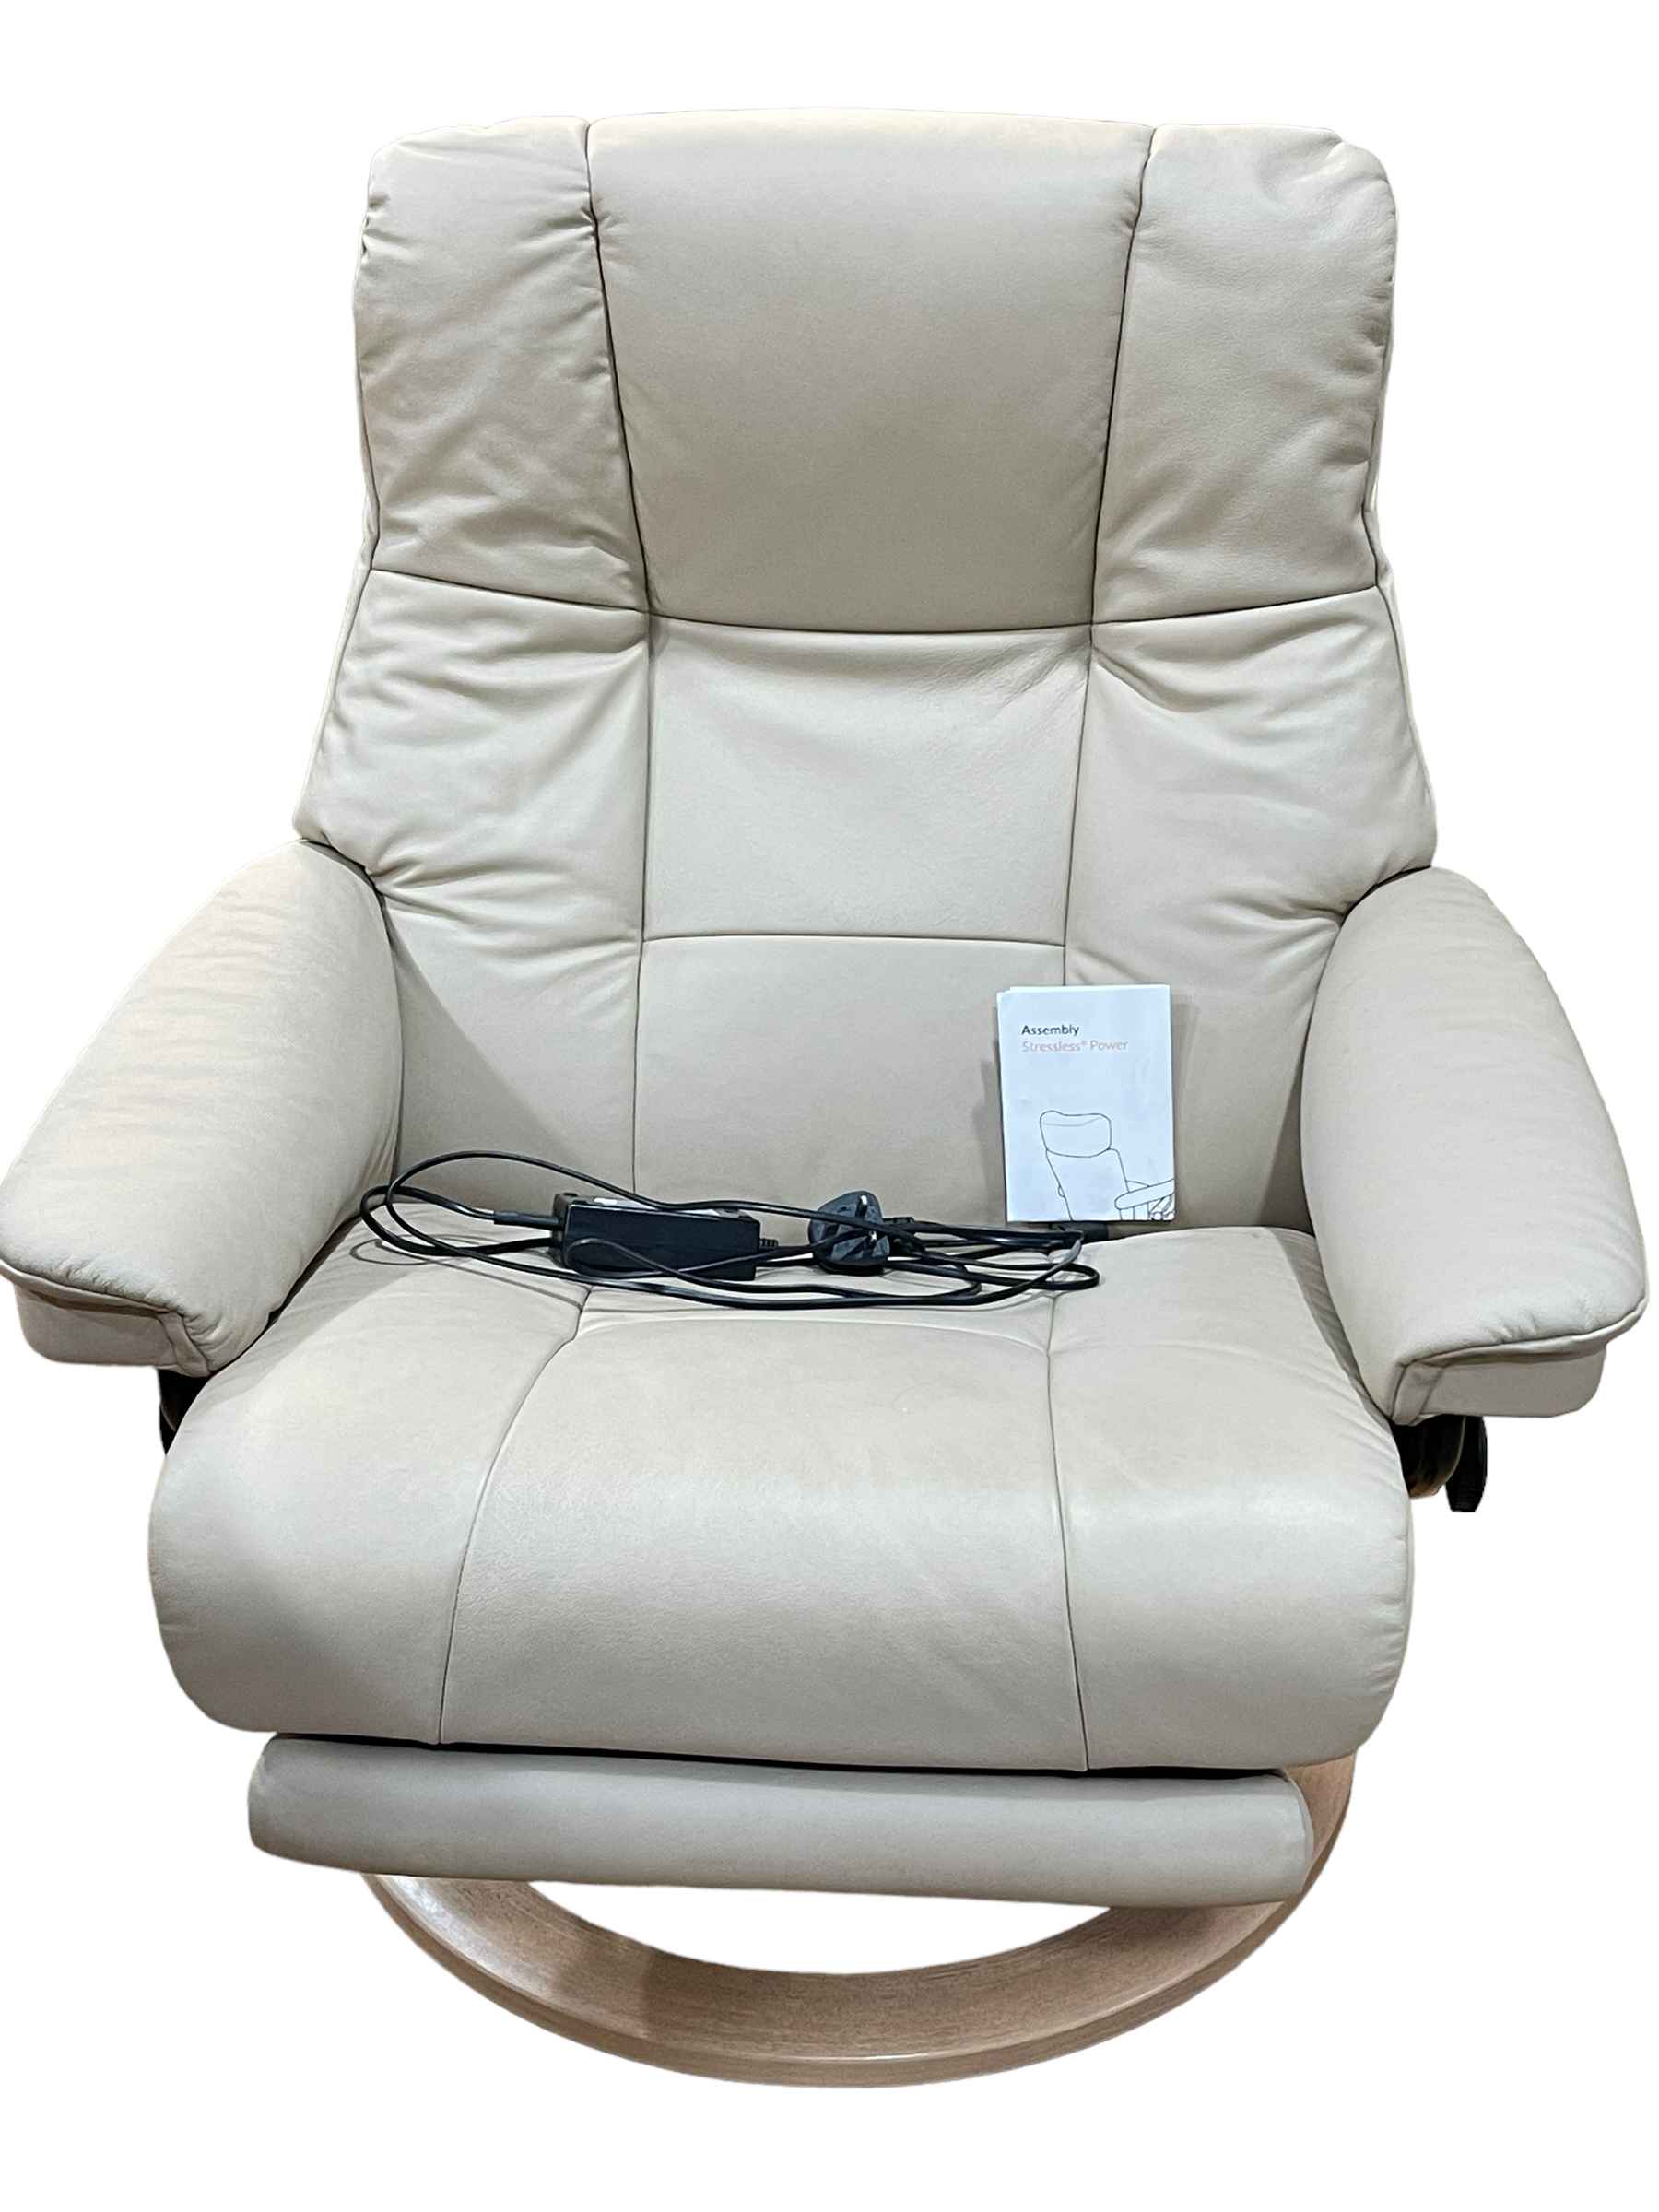 Stressless beige leather electric reclining chair.